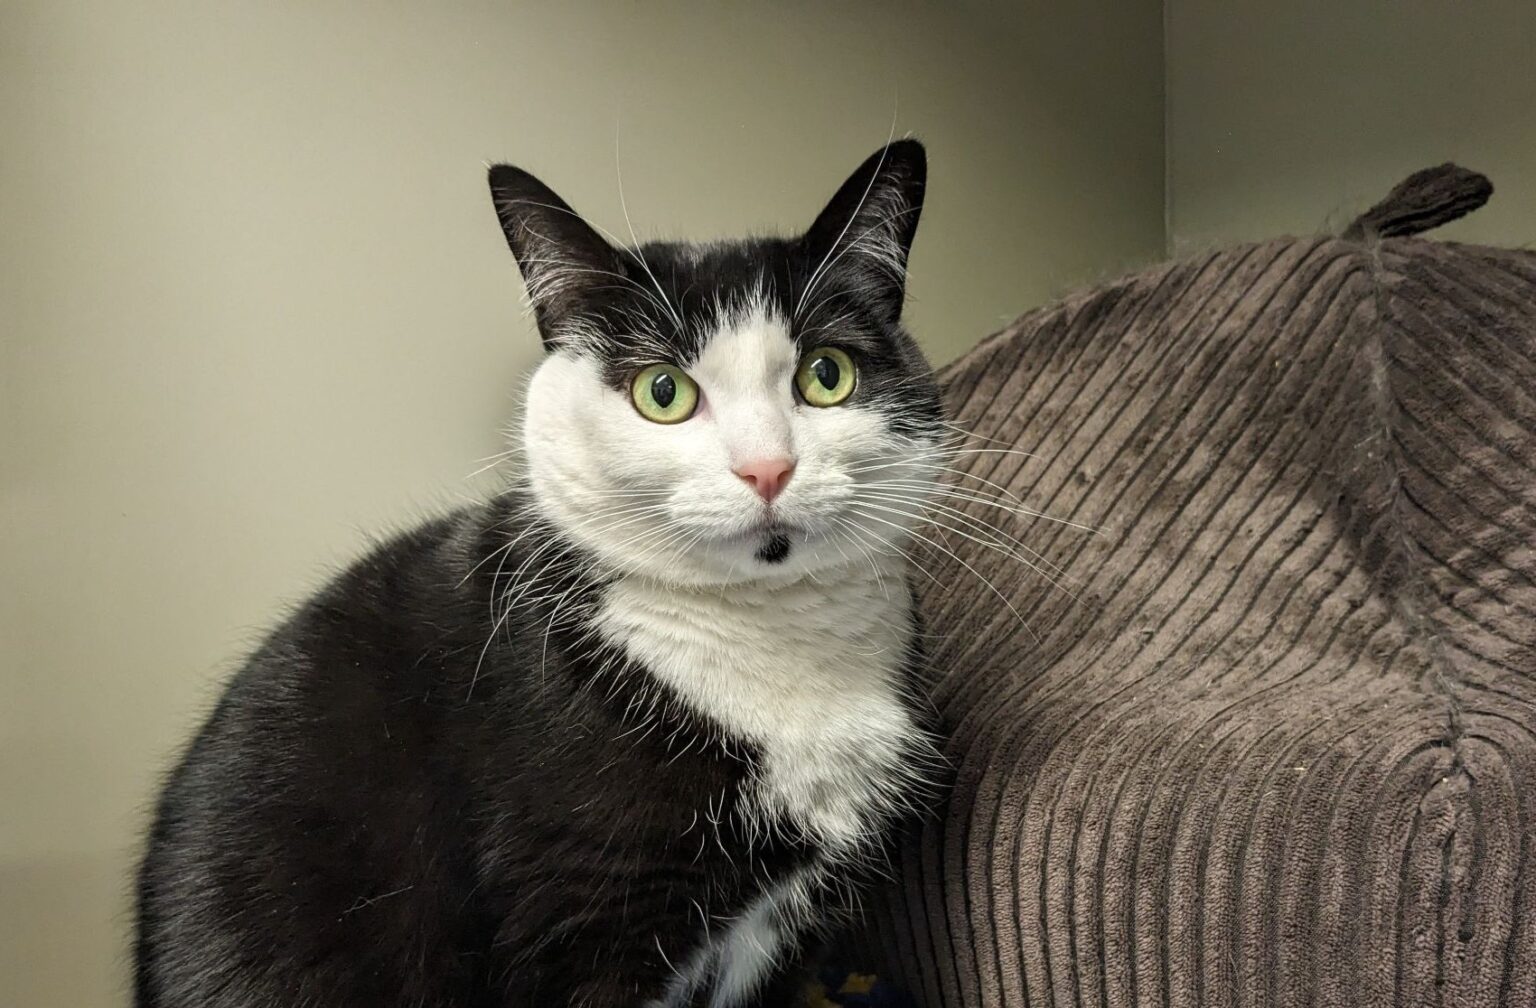 Josie, a timid cat, seeks a home with adult women, as she's scared of men, kids, and other pets. RSPCA hopes to find her a loving and patient owner.